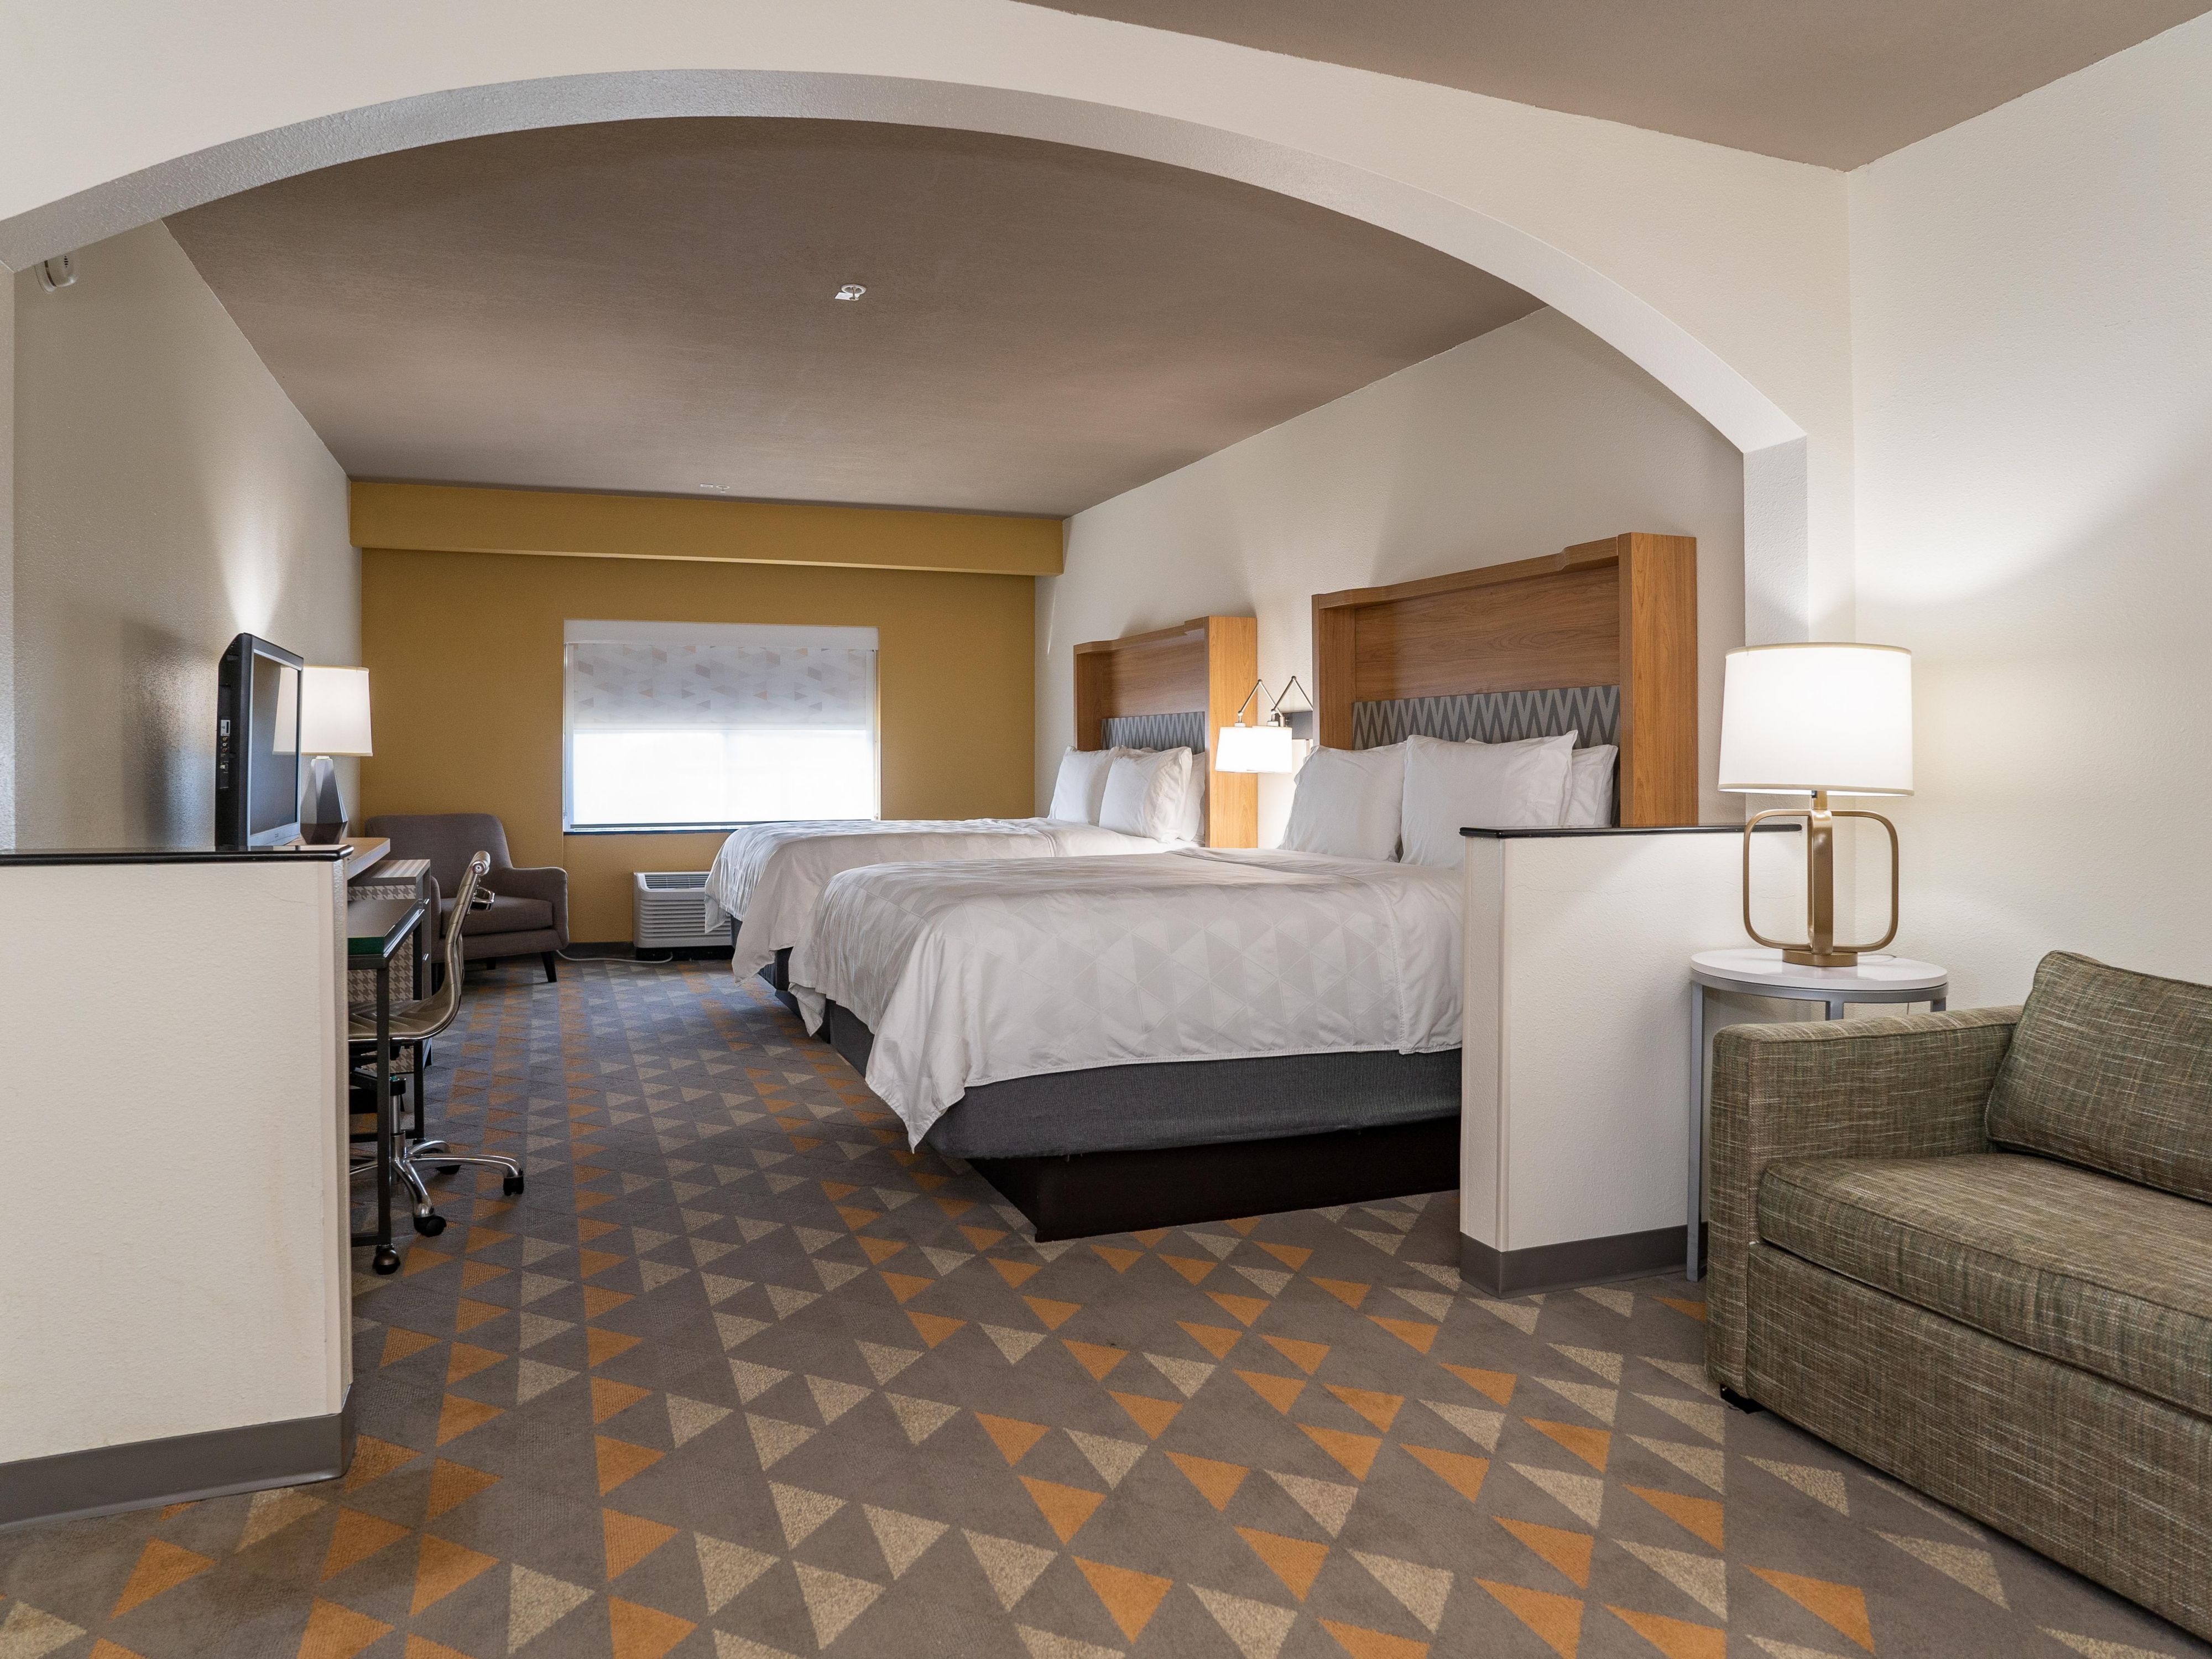 You will enjoy our newly renovated rooms and suites.  Our spacious rooms are all equipped with a sleeper sofa, small refrigerator, microwave and Keurig coffeemaker.